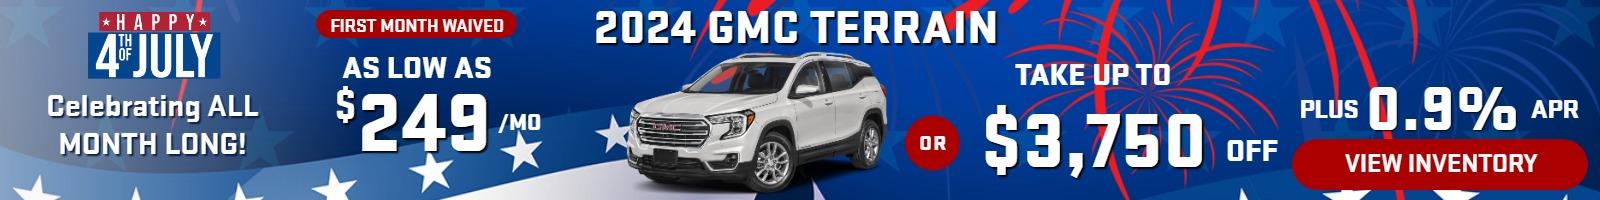 2024 GMC Terrain  

stock G2431
take up to $3750 OFF   
plus 0.9%  FINANCE
     
OR          
AS LOW AS   
 $ 249/MO    ( first month waived)